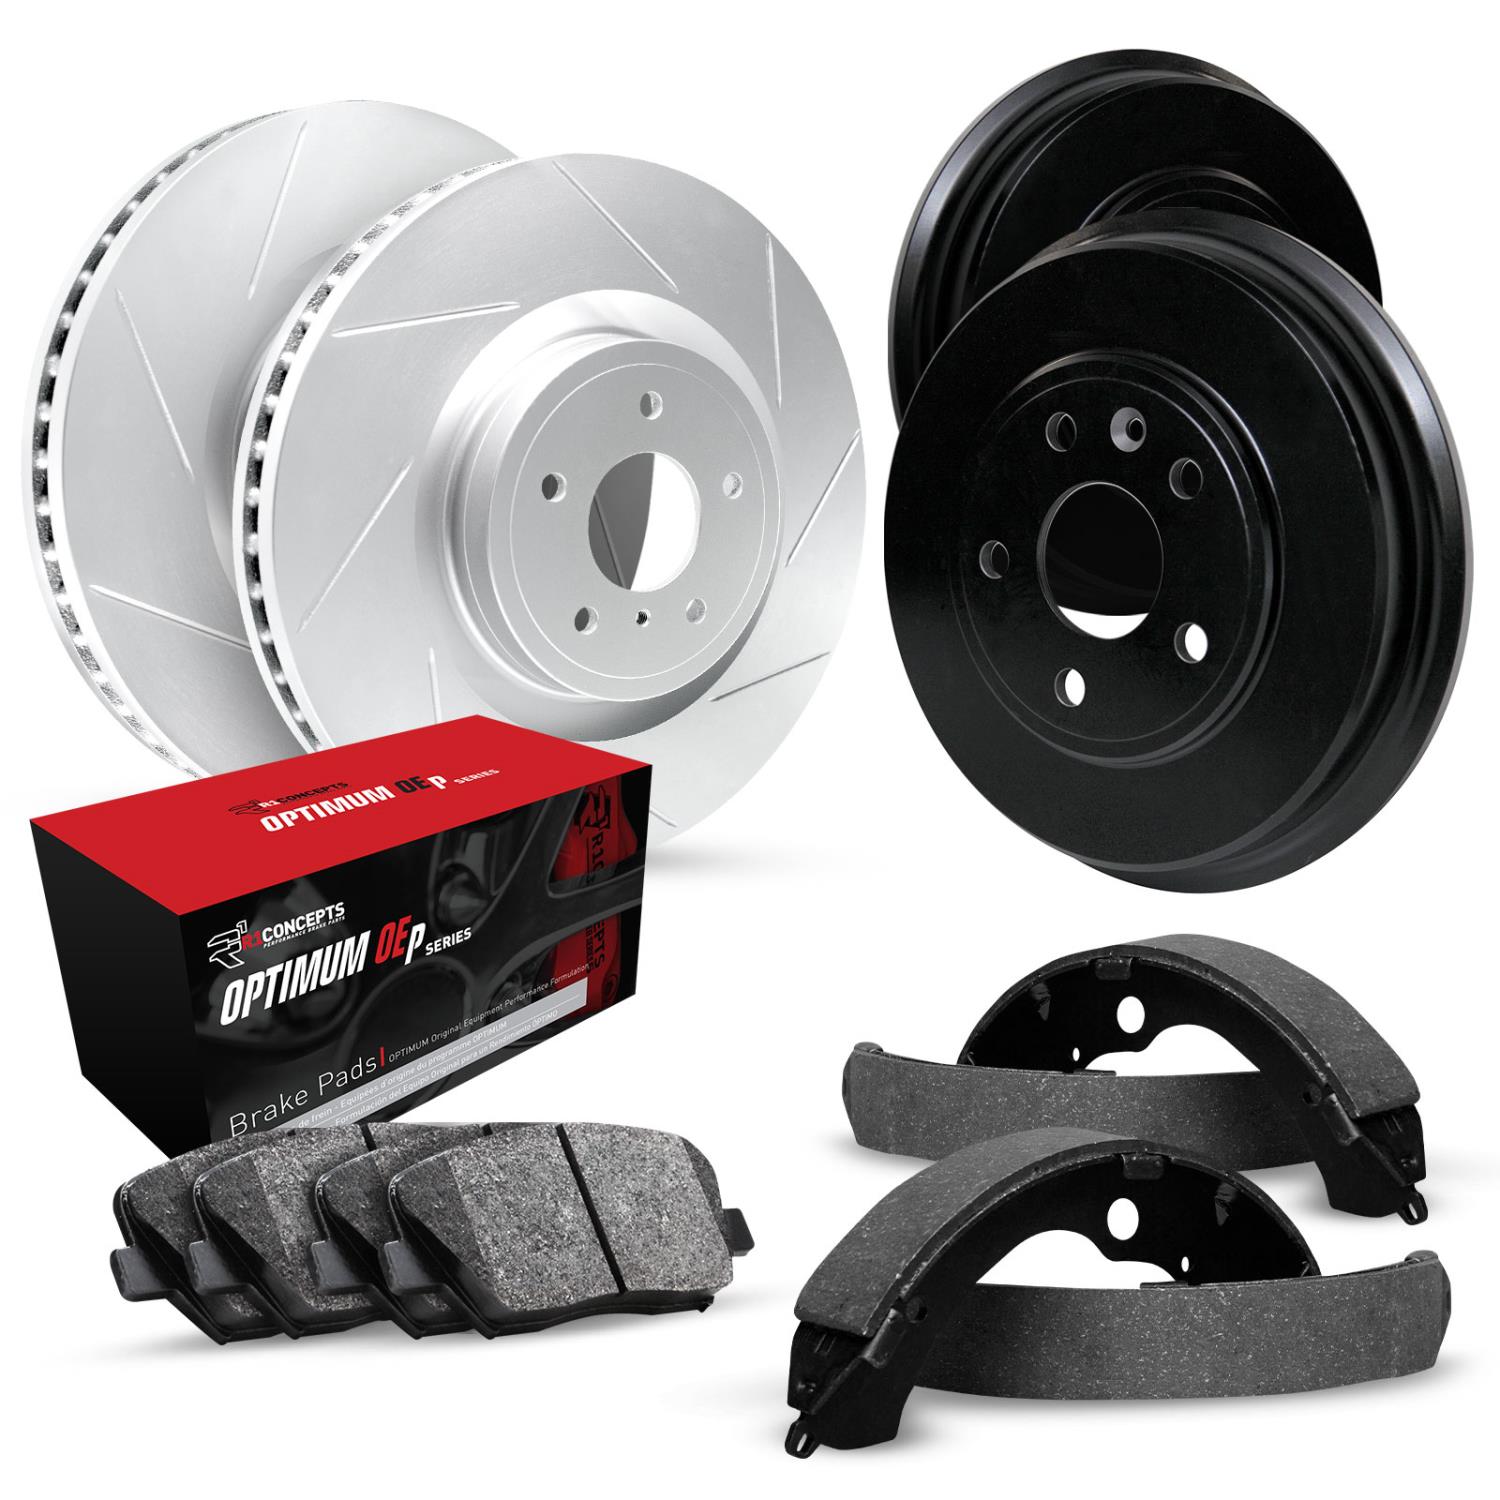 GEO-Carbon Slotted Brake Rotor & Drum Set w/Optimum OE Pads & Shoes, 1972-1975 GM, Position: Front & Rear